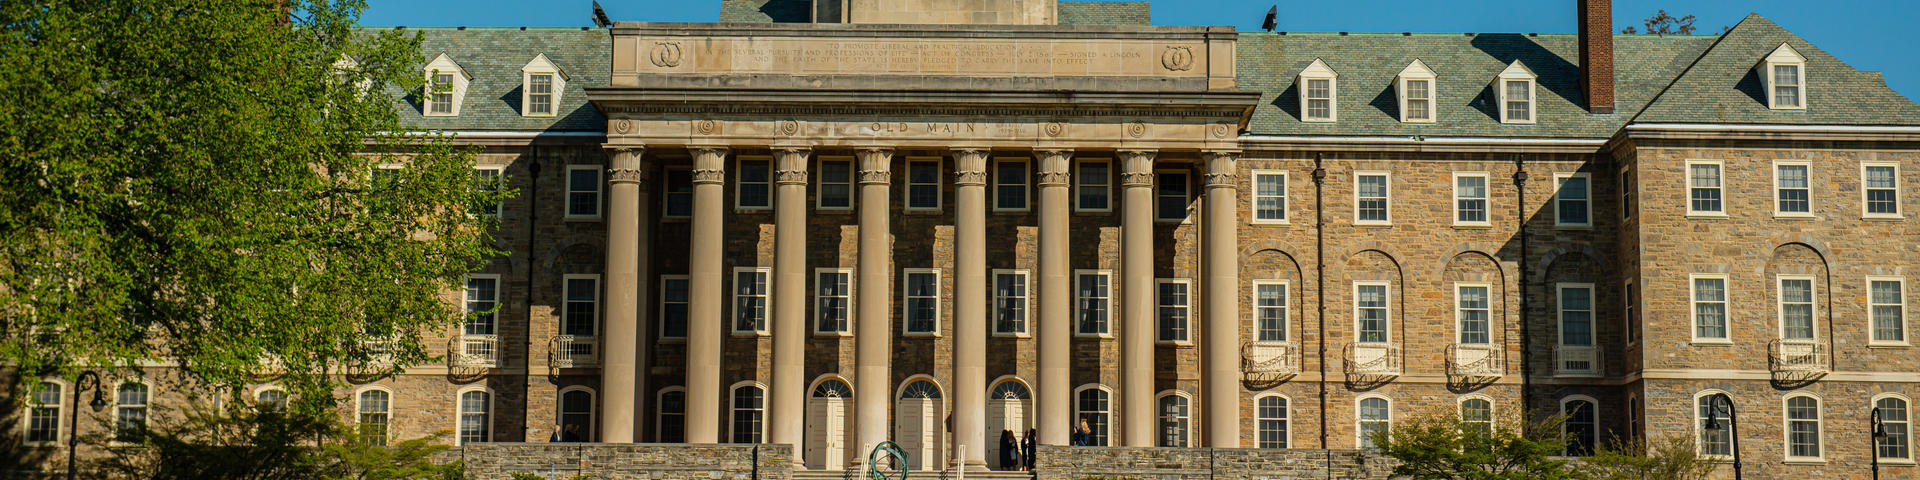 A view of the front of Old Main